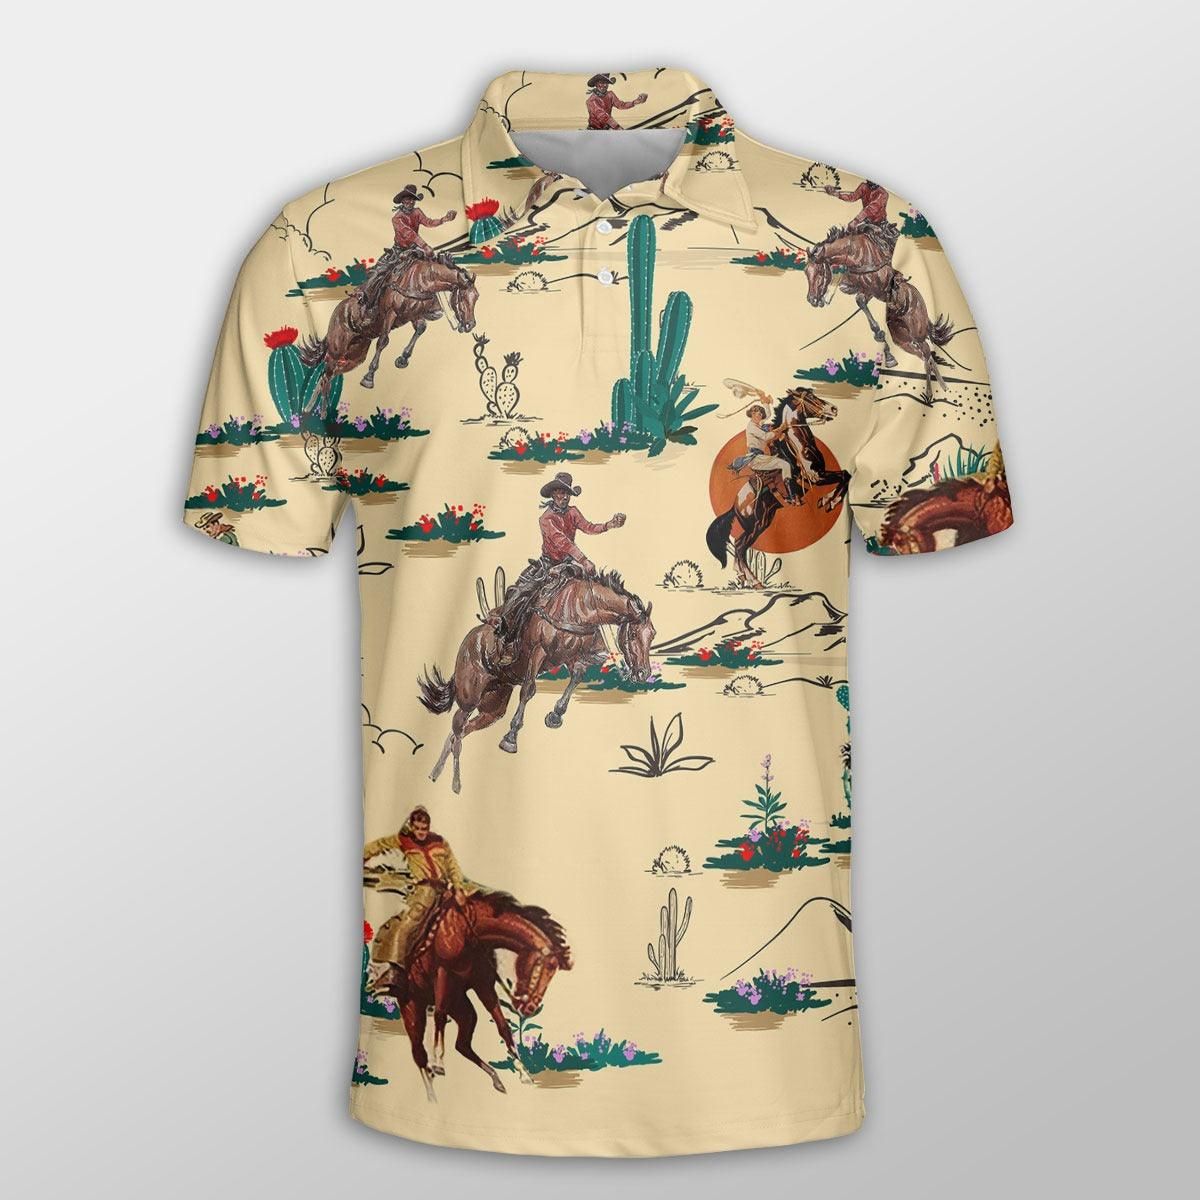 Horse Men Polo Shirts For Summer - Horse Cowboy Pattern Shirts For Men - Perfect Gift For Horse Lovers, Cowboy, Cattle Lovers